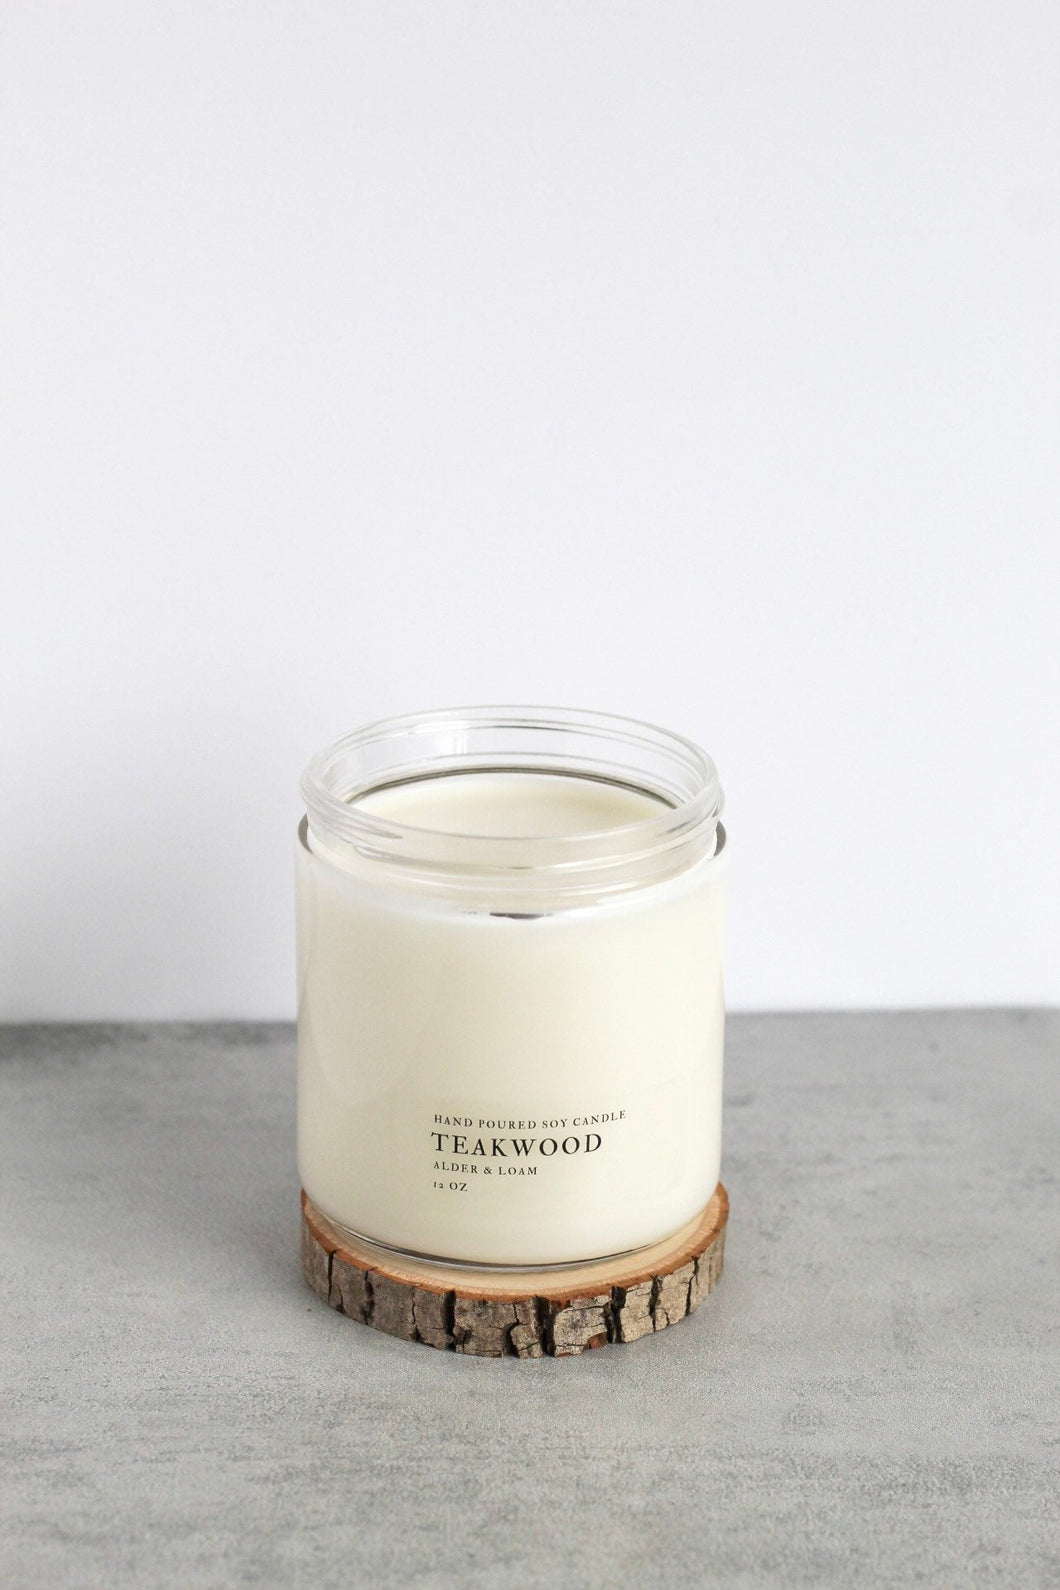 Teakwood  Double Wick Soy Candle,  Hand Poured, Natural, Eco Friendly, Earthy Scent, 12 oz Jar